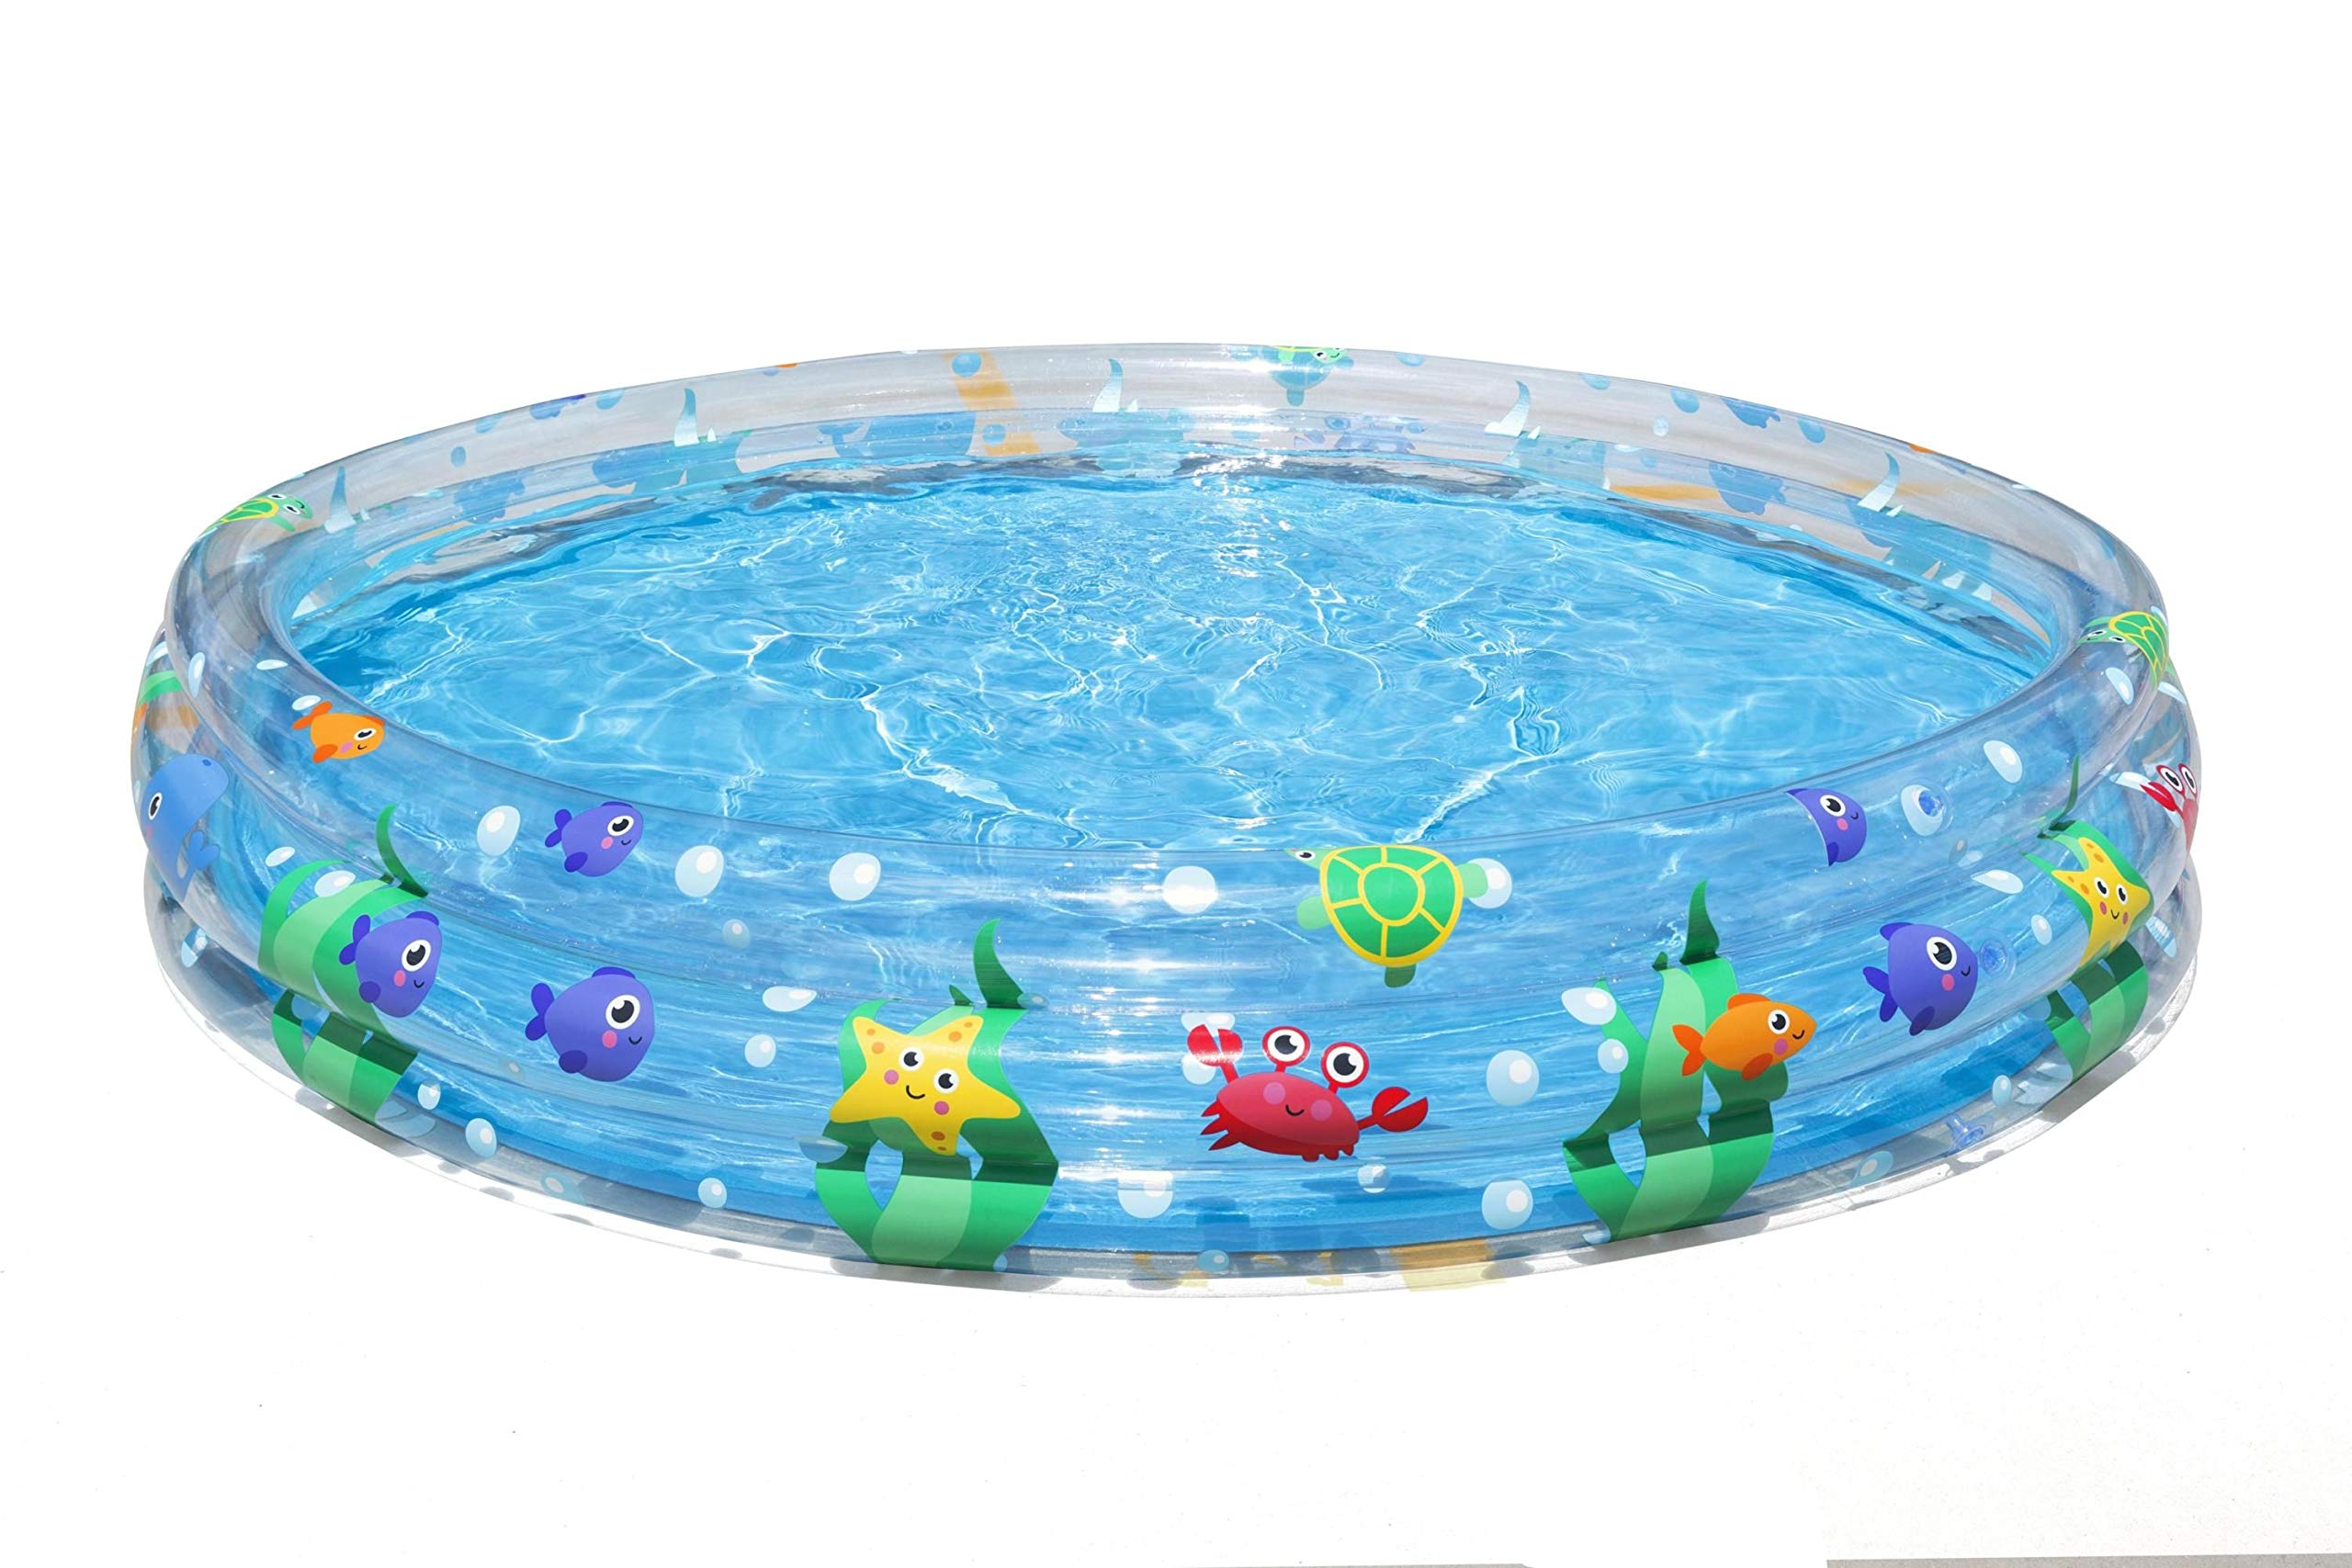 Bestbay – Piscina inflable pequeña